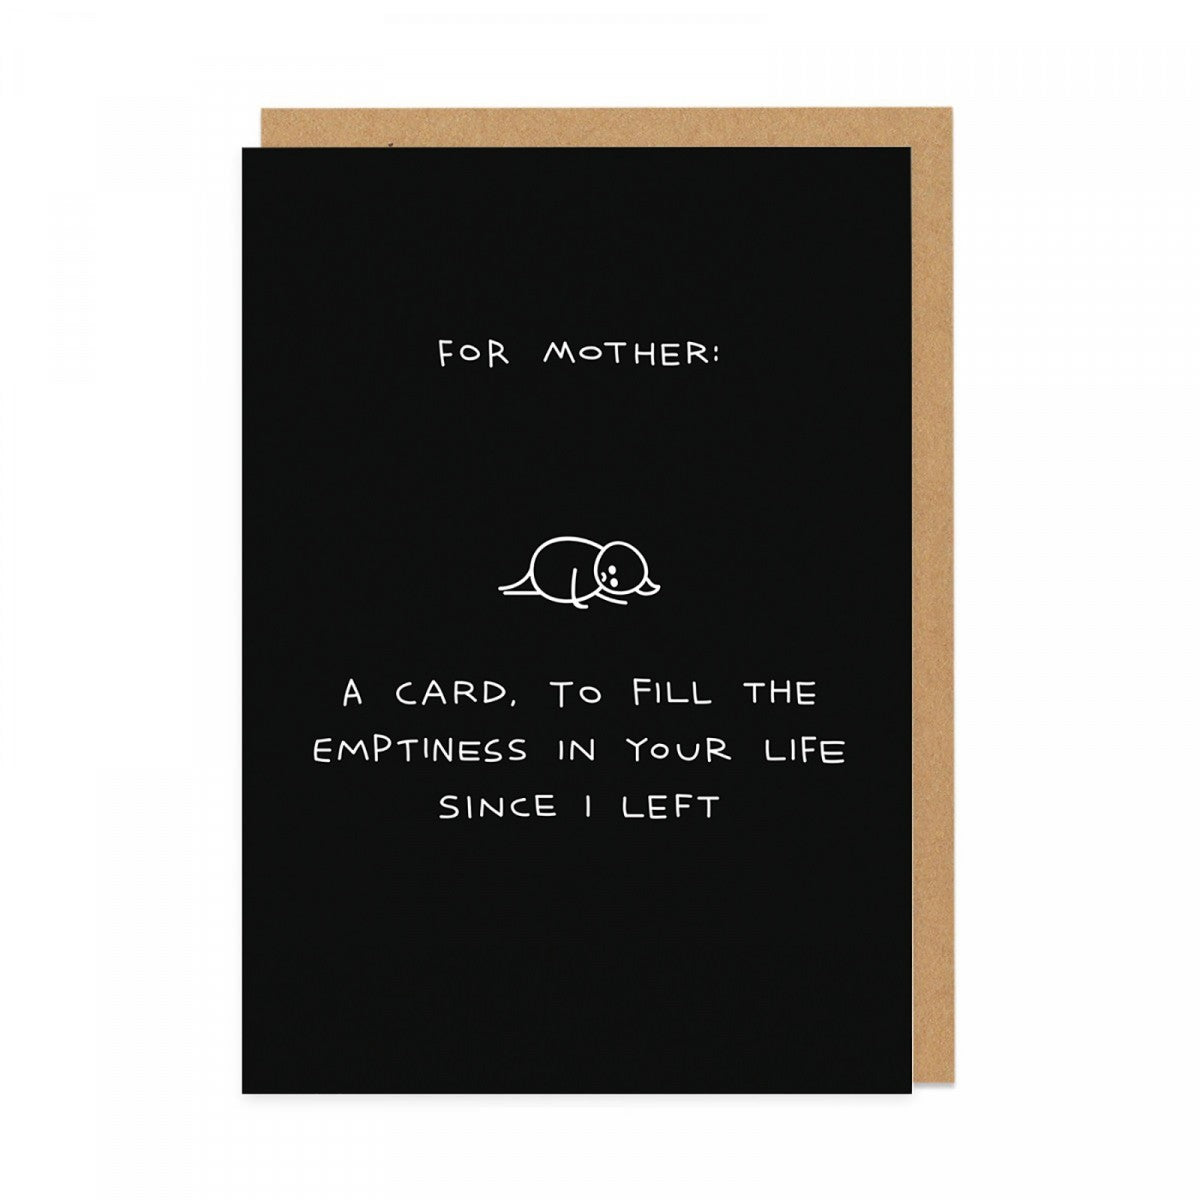 For Mother: A Card, To Fill The Emptiness In Your Life Since I Left - Mother's Day Greeting Card - Mellow Monkey